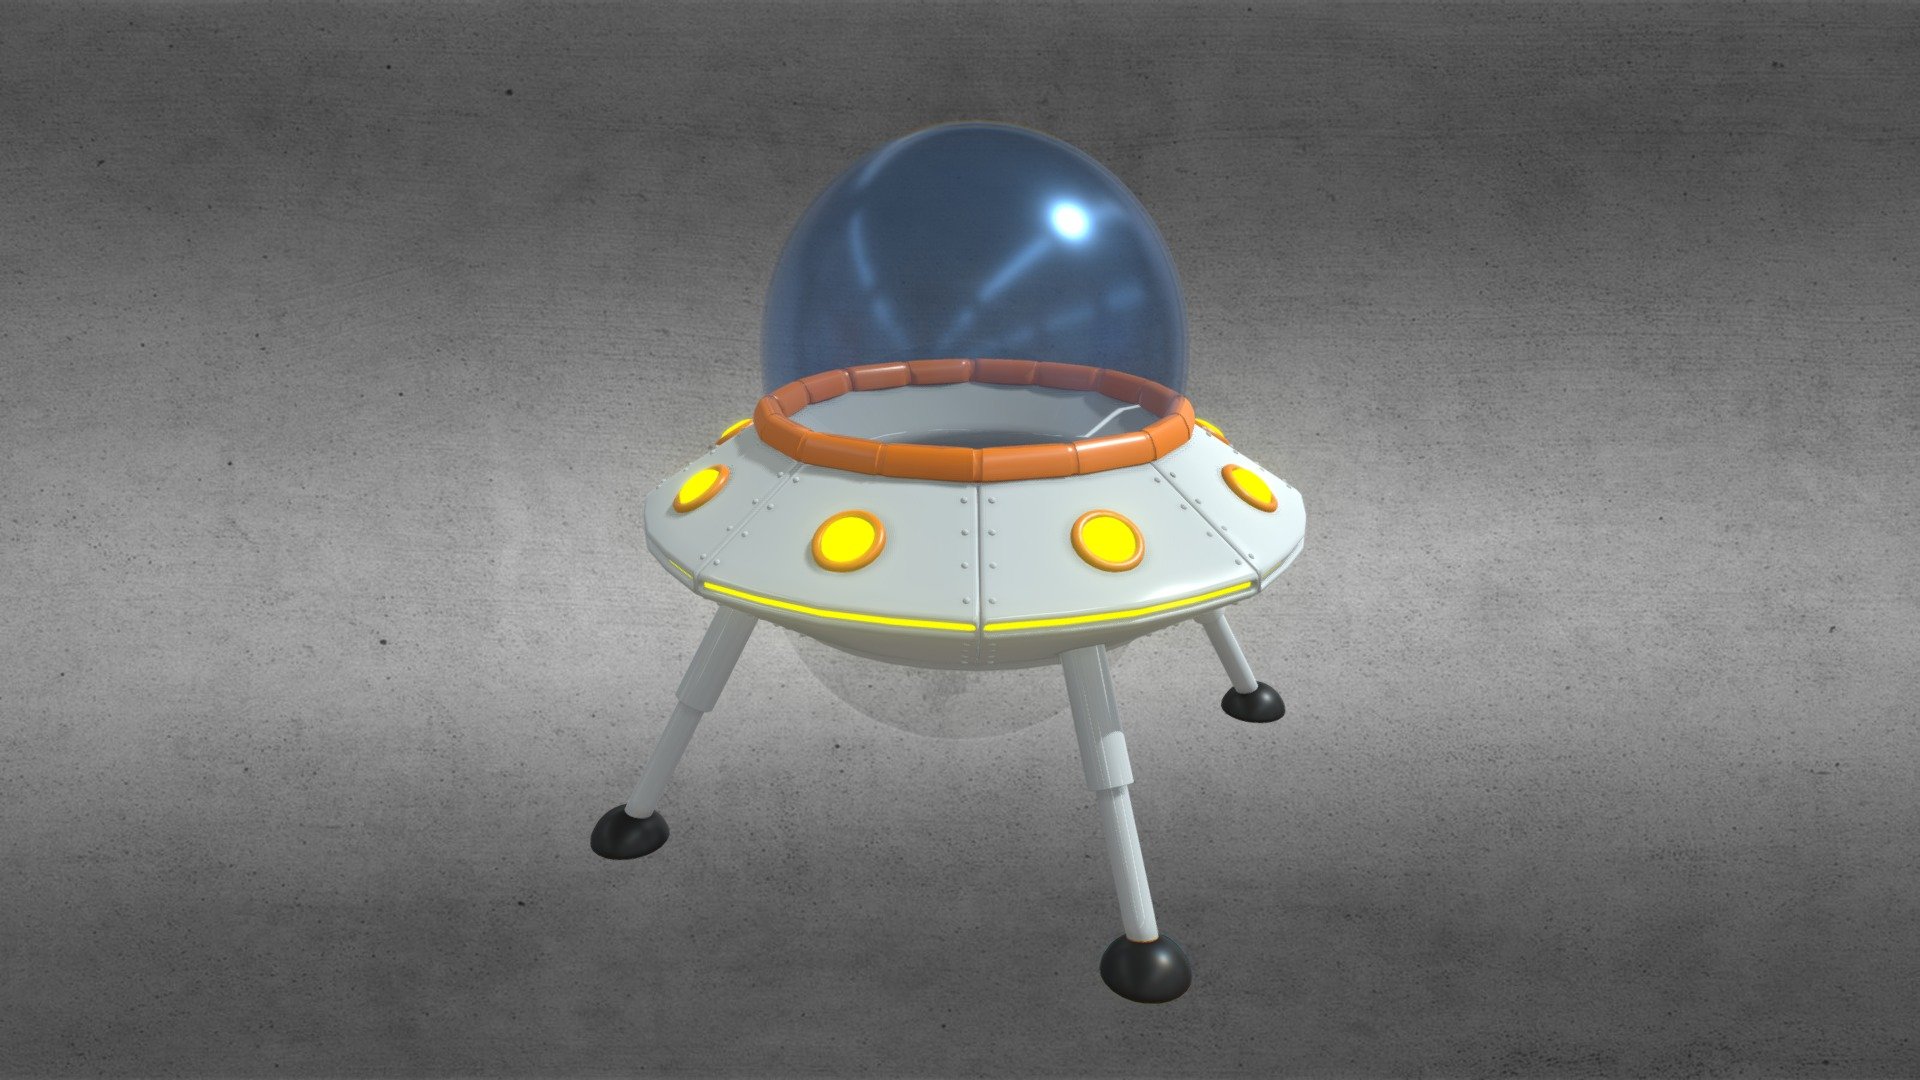 Cartoon UFO V2 is a high quality, photo real model that will enhance detail and realism to any of your rendering projects. detailed design that allows for close-up renders, and was originally modeled in cinema 4d 16 and rendered with marmoset toolbag 3 . Renders have no post processing. 
Hope you like it! 



Features: 
- High quality polygonal model, correctly scaled for an accurate representation of the original object. 
- All colors can be easily modified. 
- Materials are included in every format. 
- Cinema 4d models are grouped for easy selection, and objects are logically named for ease of scene management . 
- No part-name confusion when importing several models into a scene. 
- No cleaning up necessary just drop your models into the scene and start rendering. 
- No special plugin needed to open scene. 
- Units: cm



File Formats: 
- Cinema 4D R16 . 
- 3ds MAX 2012. 
- Fbx HQ . 
- Fbx . 
-3ds . 
-Obj . 
-Tbscene . 
-Stl 3d model